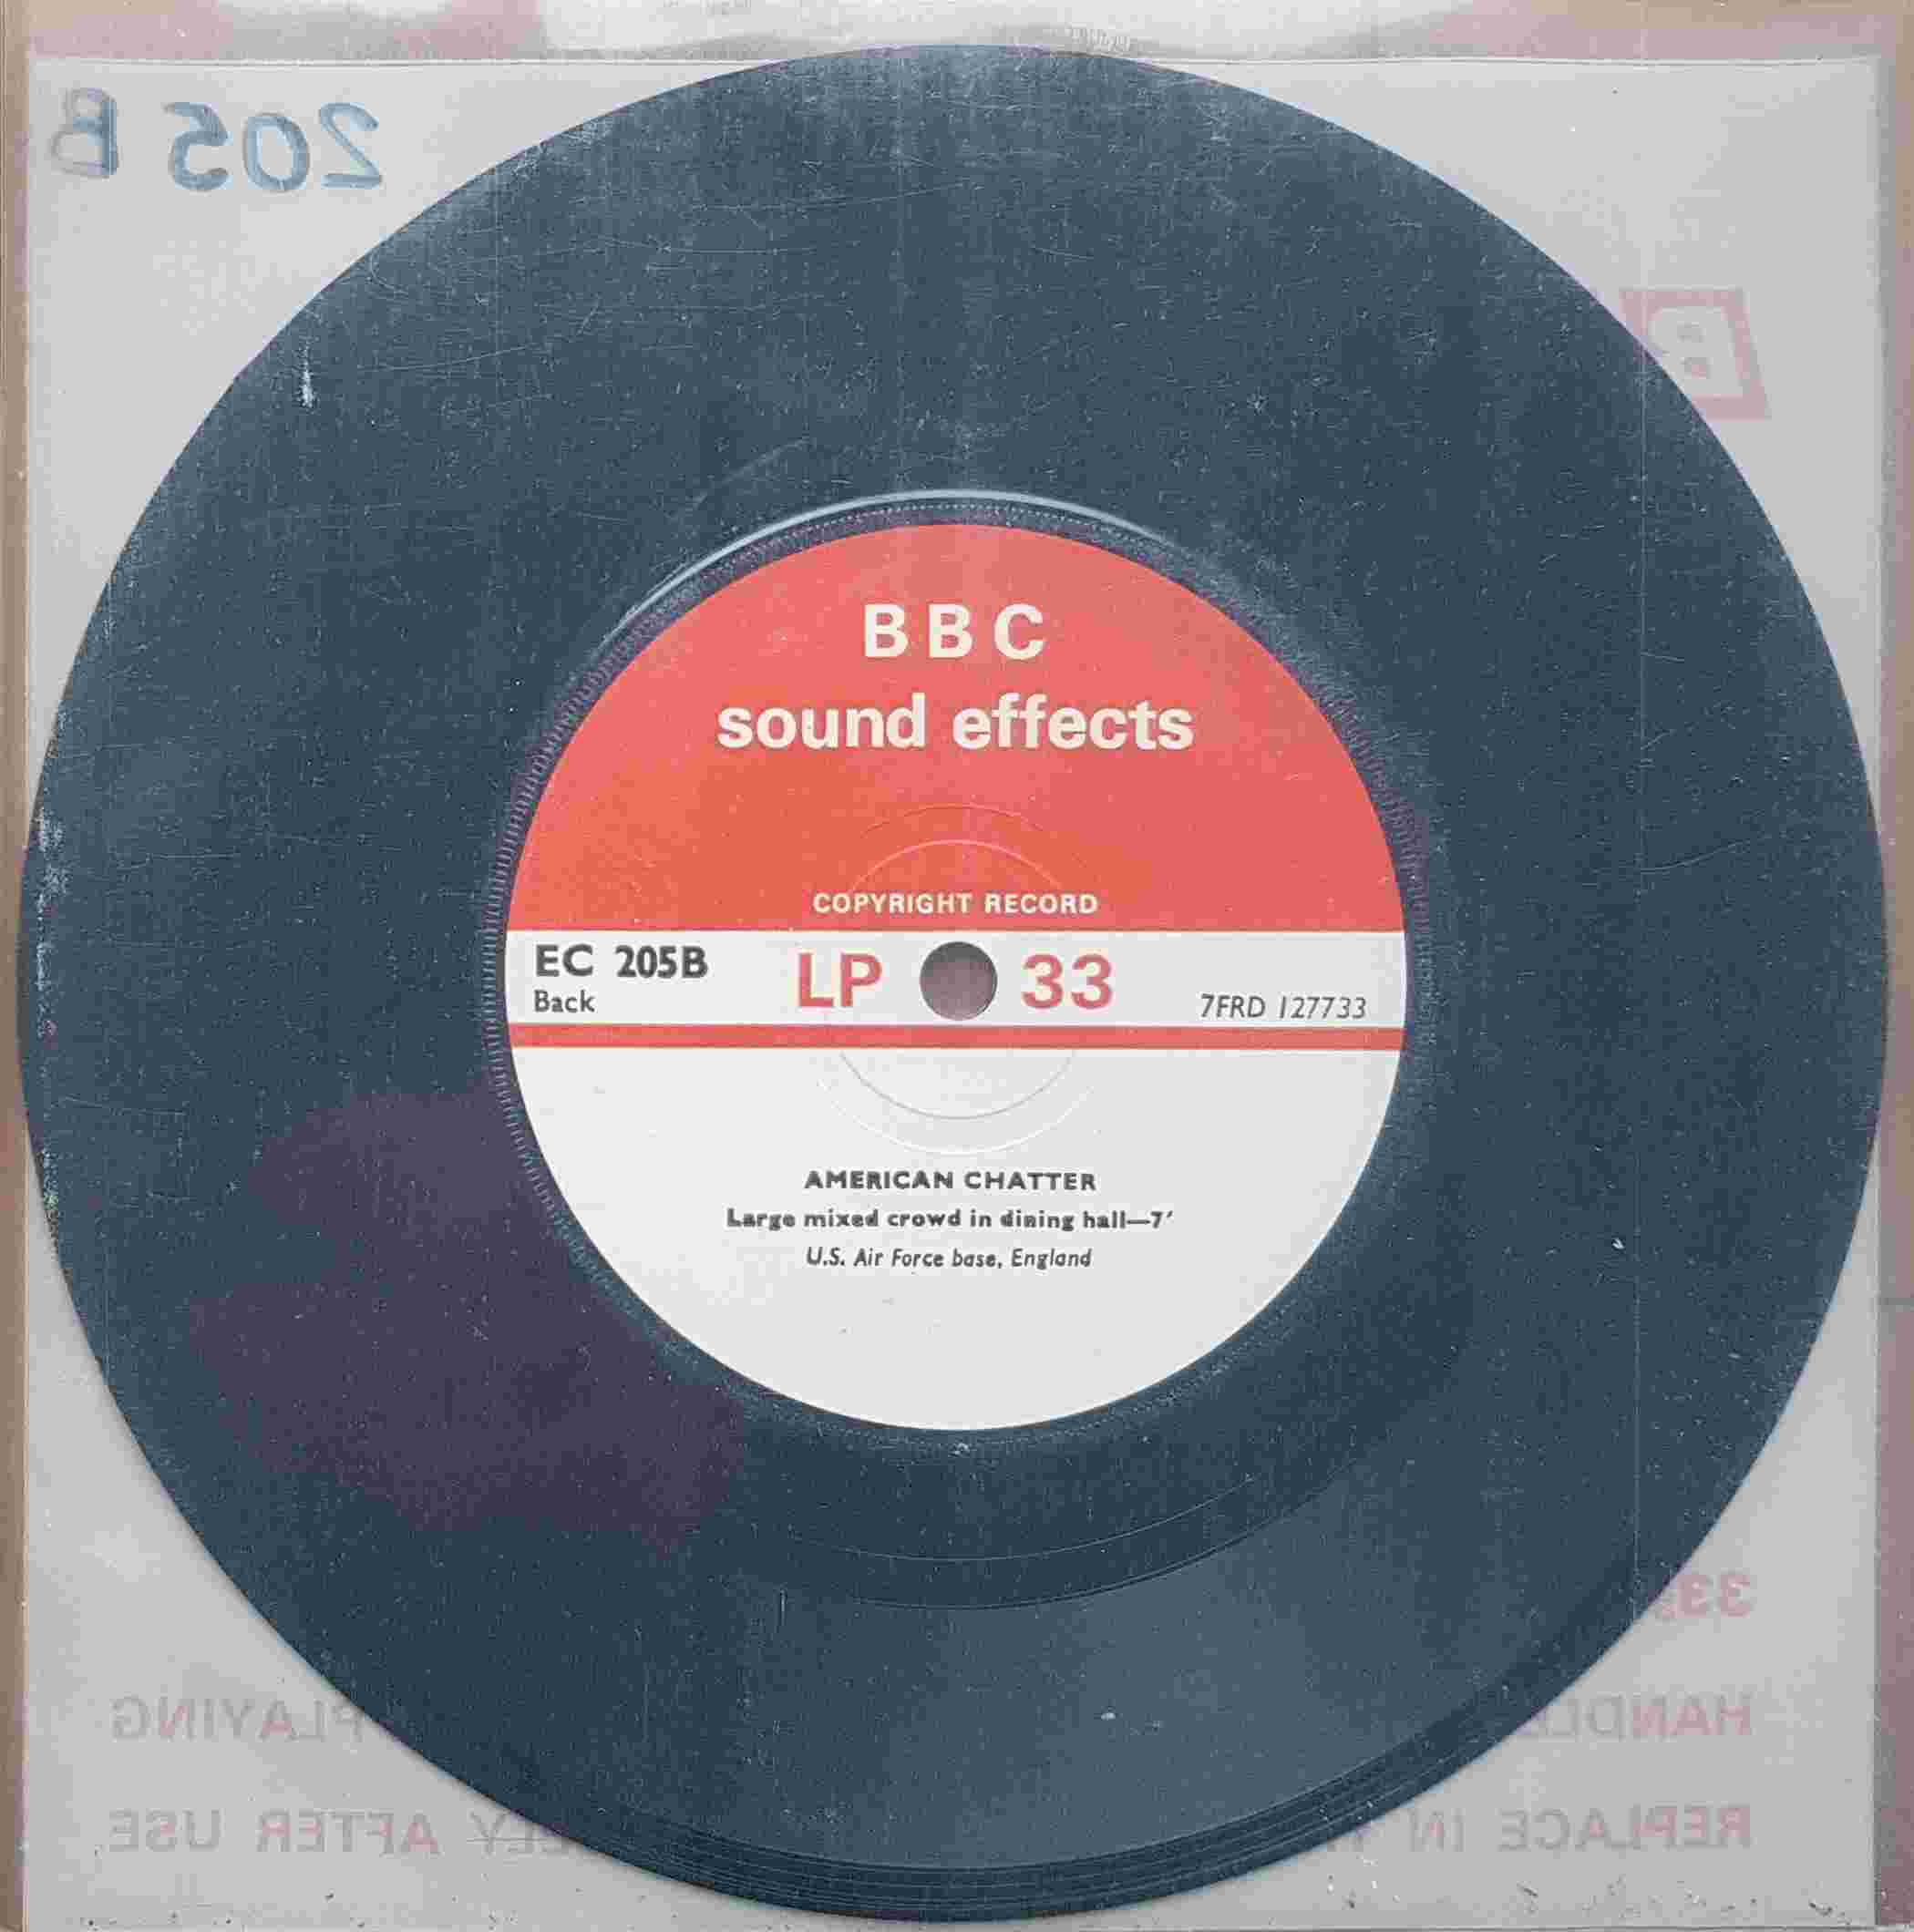 Picture of EC 205B American chatter by artist Not registered from the BBC records and Tapes library